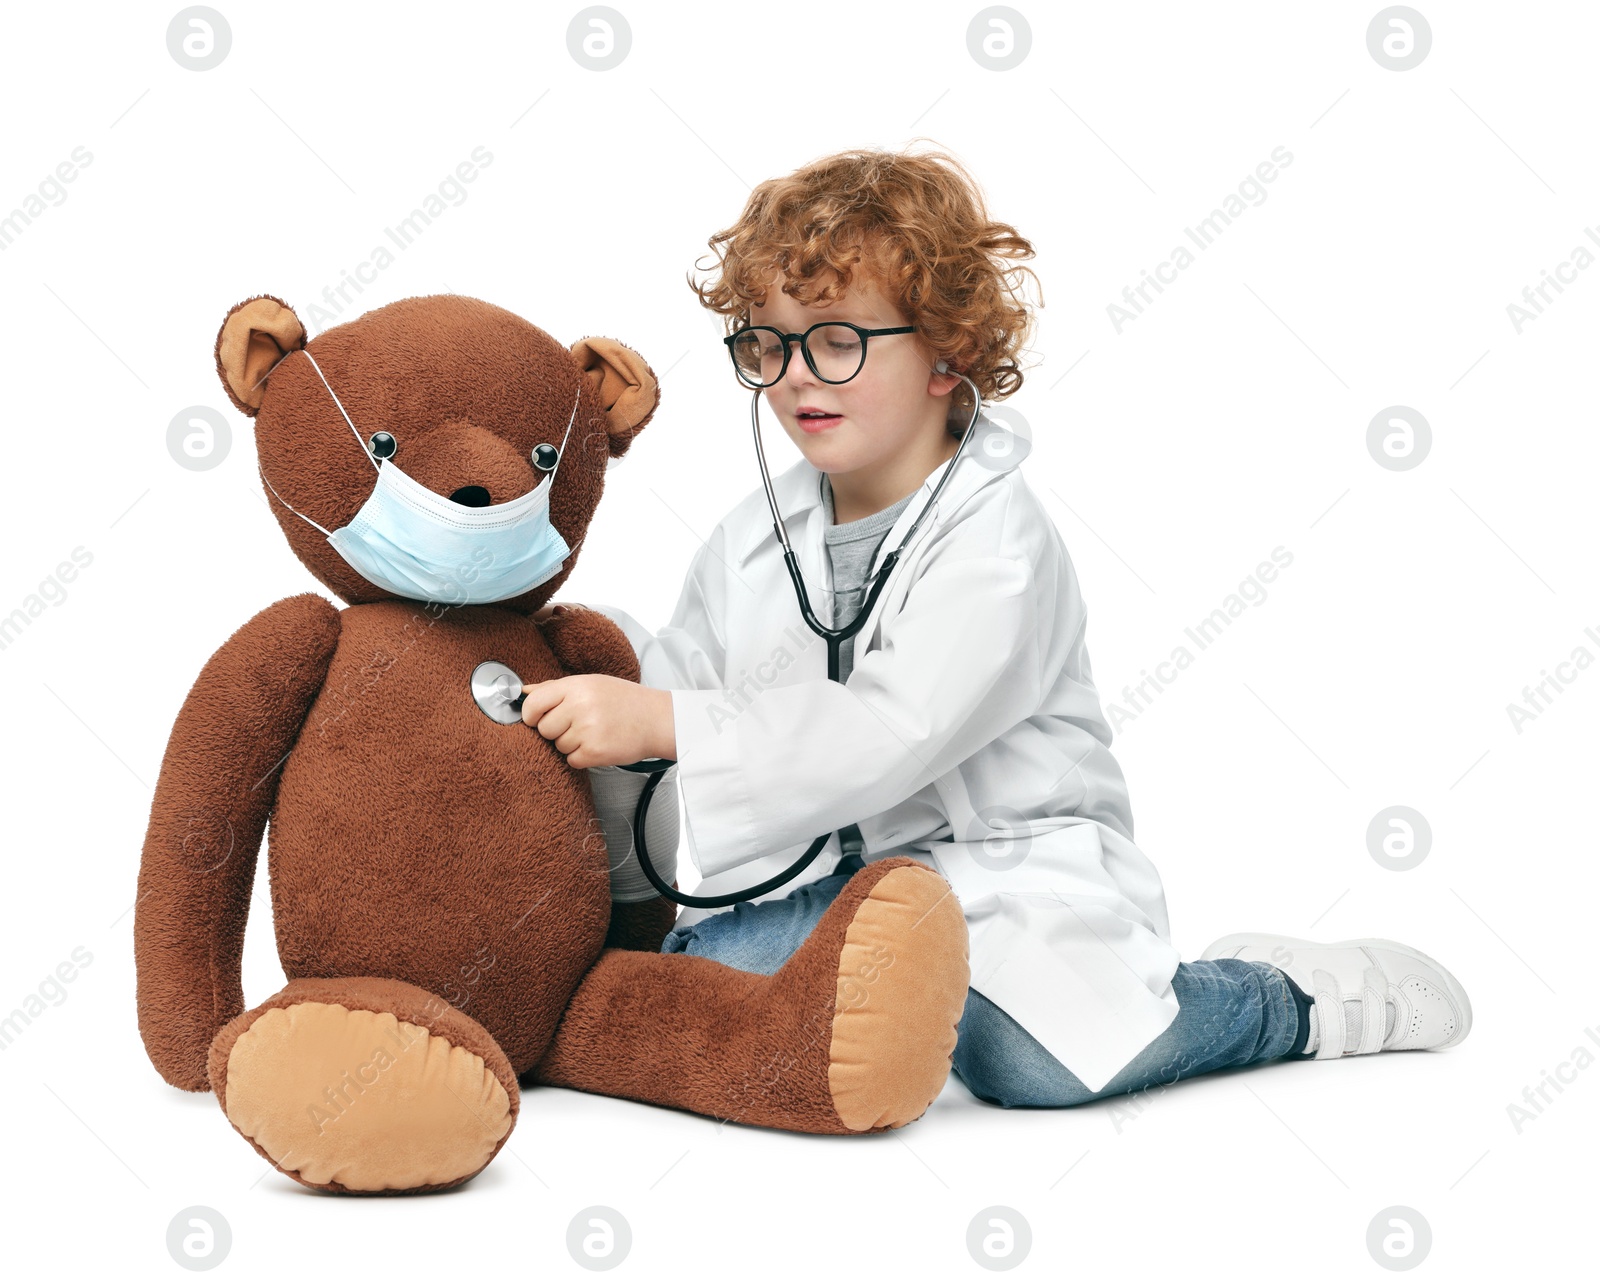 Photo of Little boy playing doctor with toy bear on white background